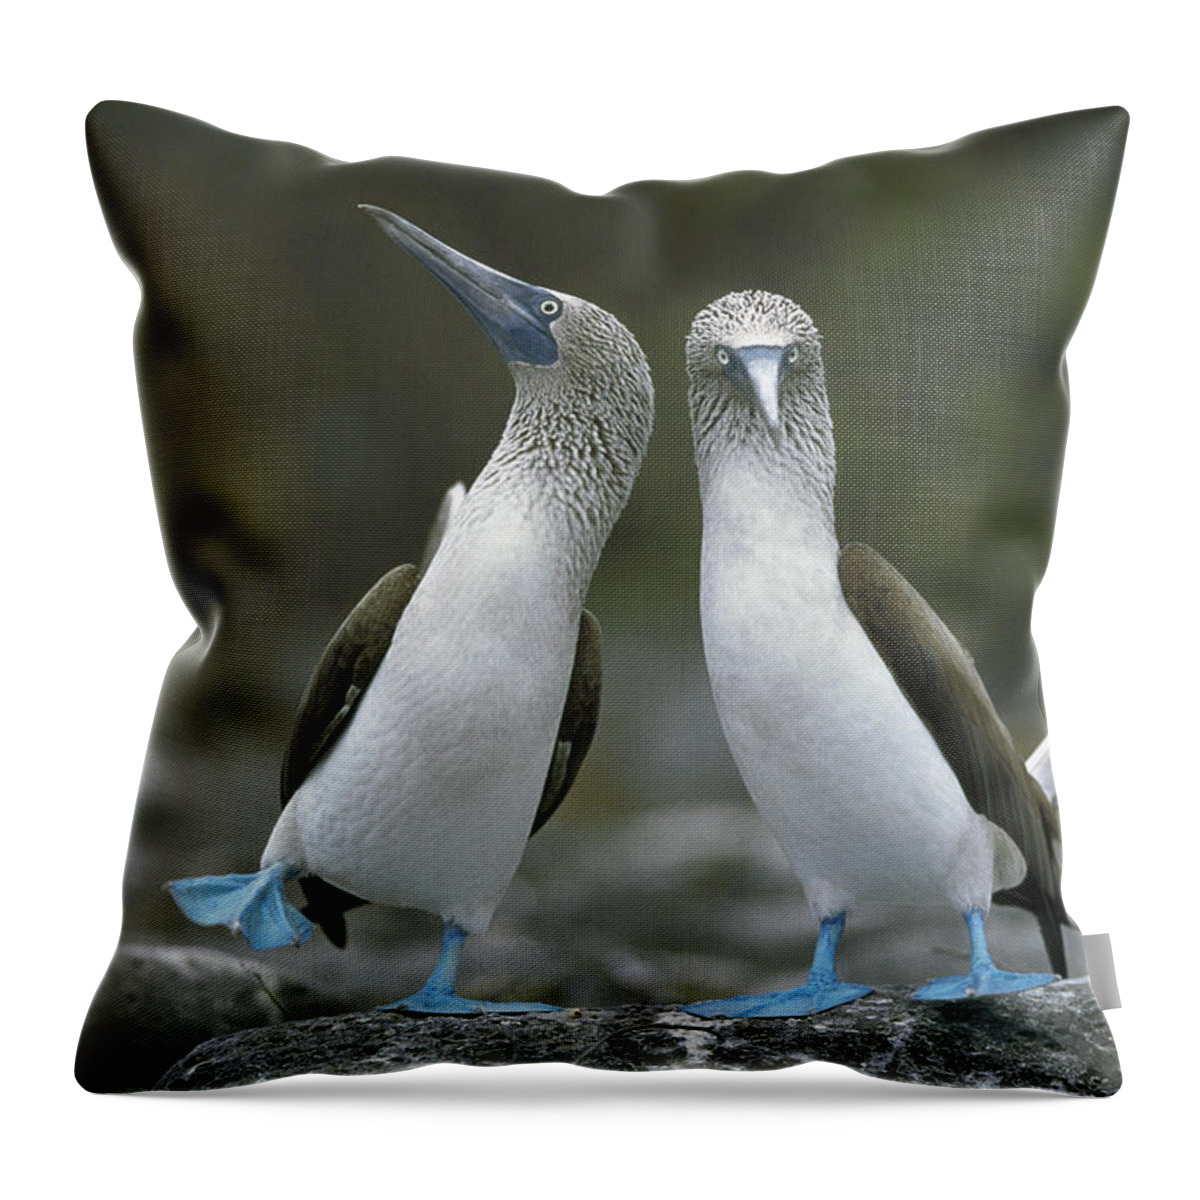 00141144 Throw Pillow featuring the photograph Blue Footed Booby Dancing by Tui De Roy